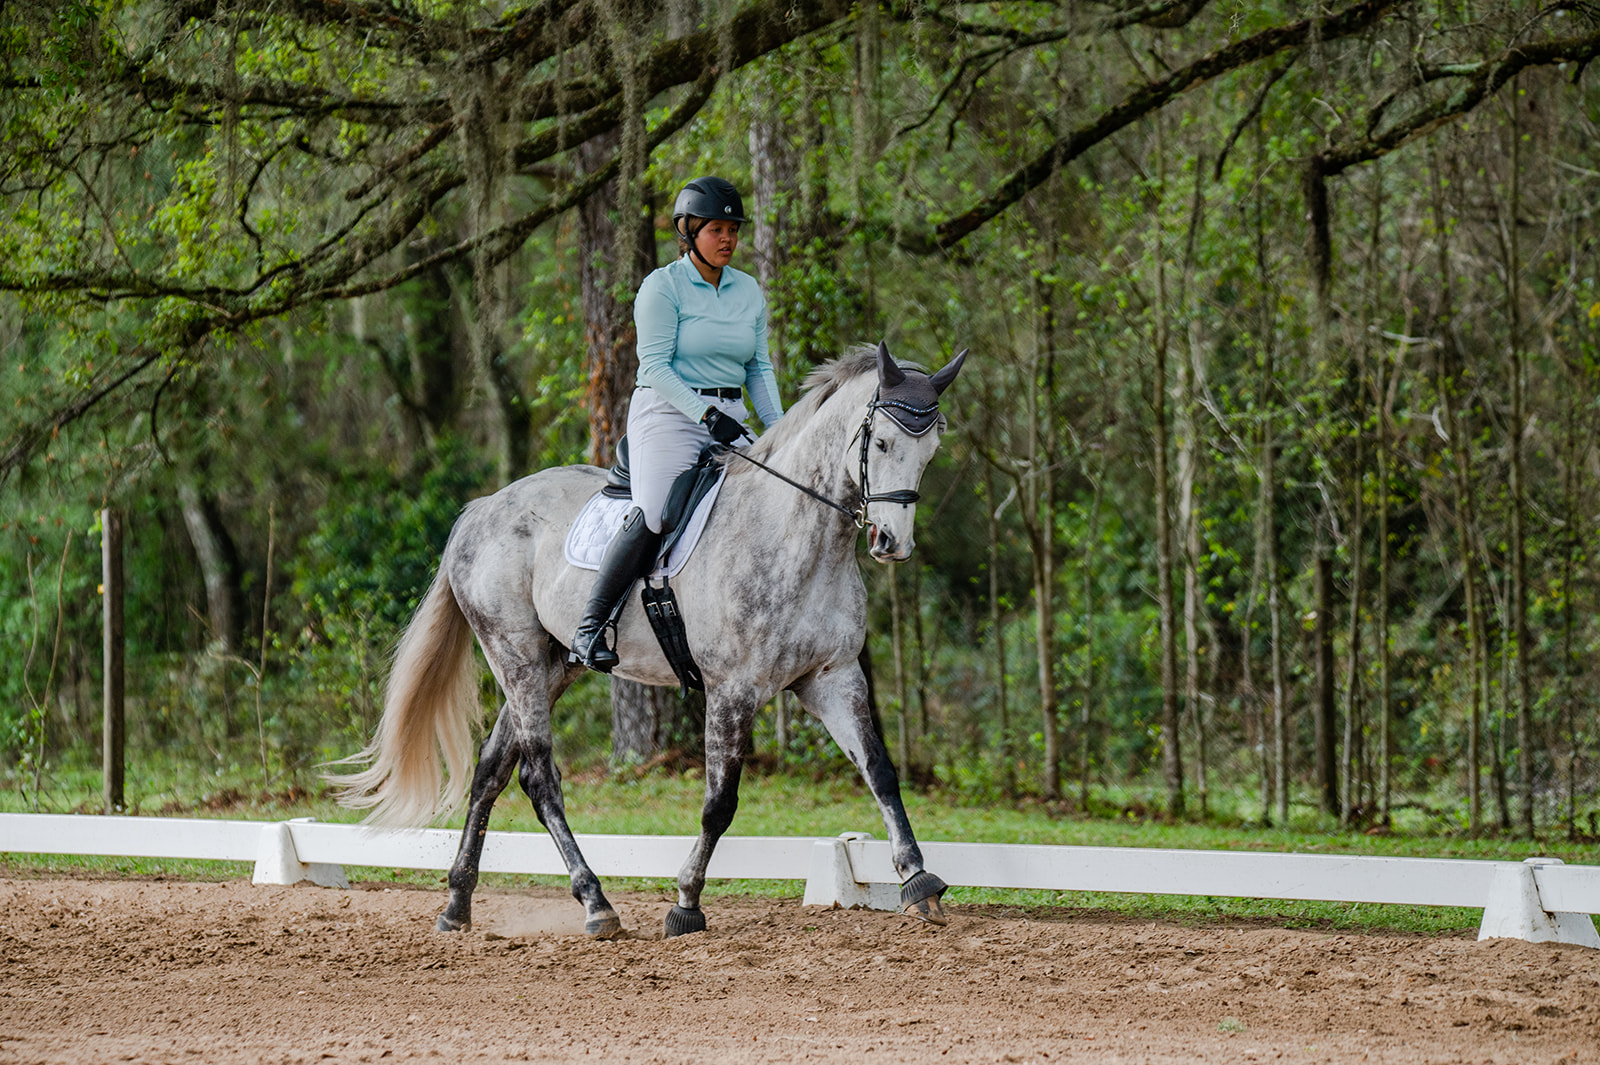 Equestrian competing in Dressage during Eventing competition in Tallahassee, FL at Mahan Farm. calicoandchrome.com